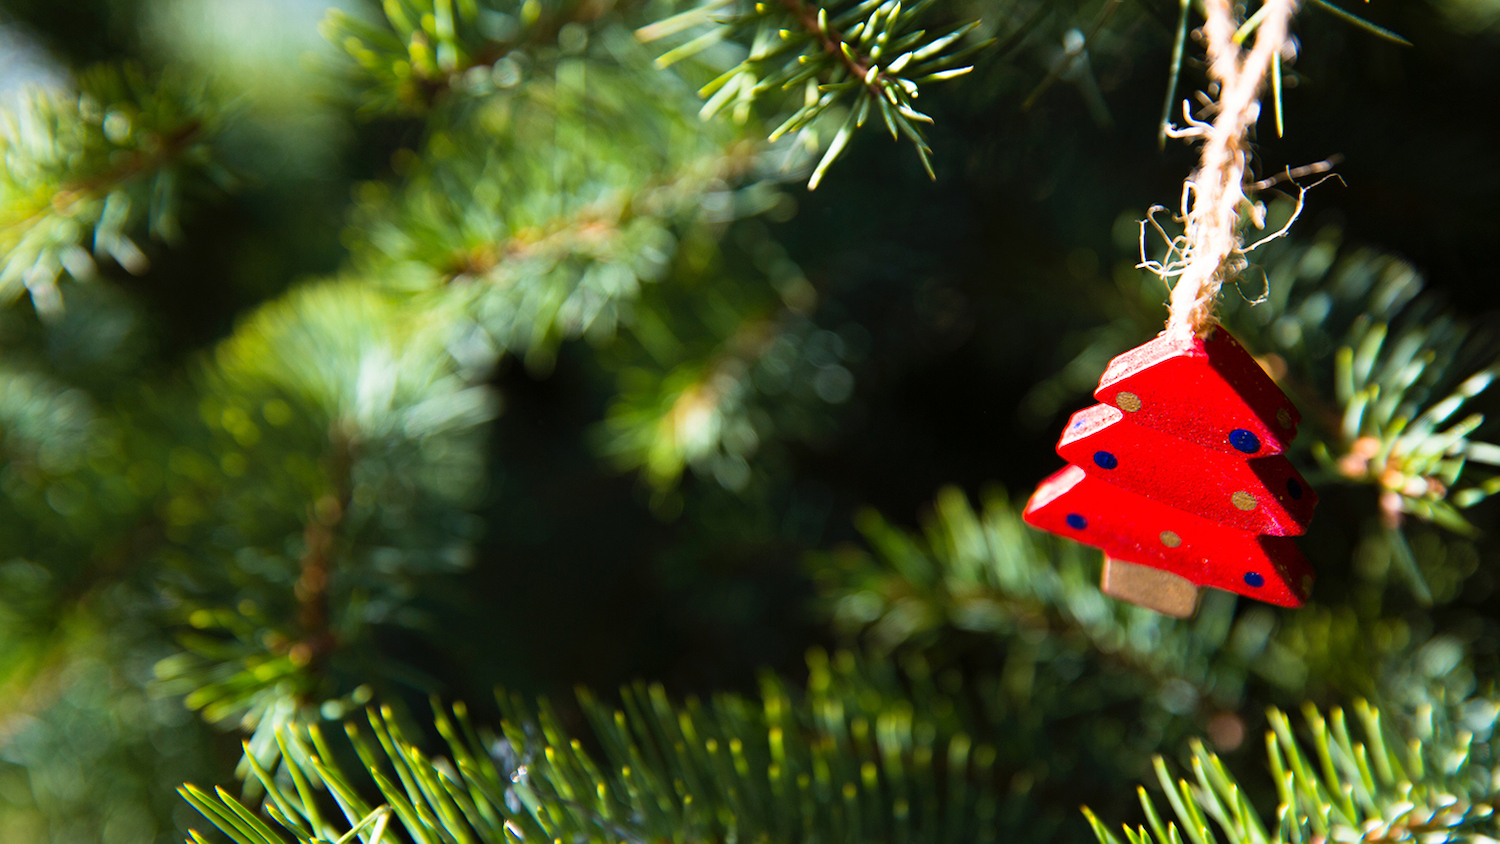 Christmas tree ornament - 5 Christmas Tree Species Found in North Carolina - College of Natural Resources News - NC State University